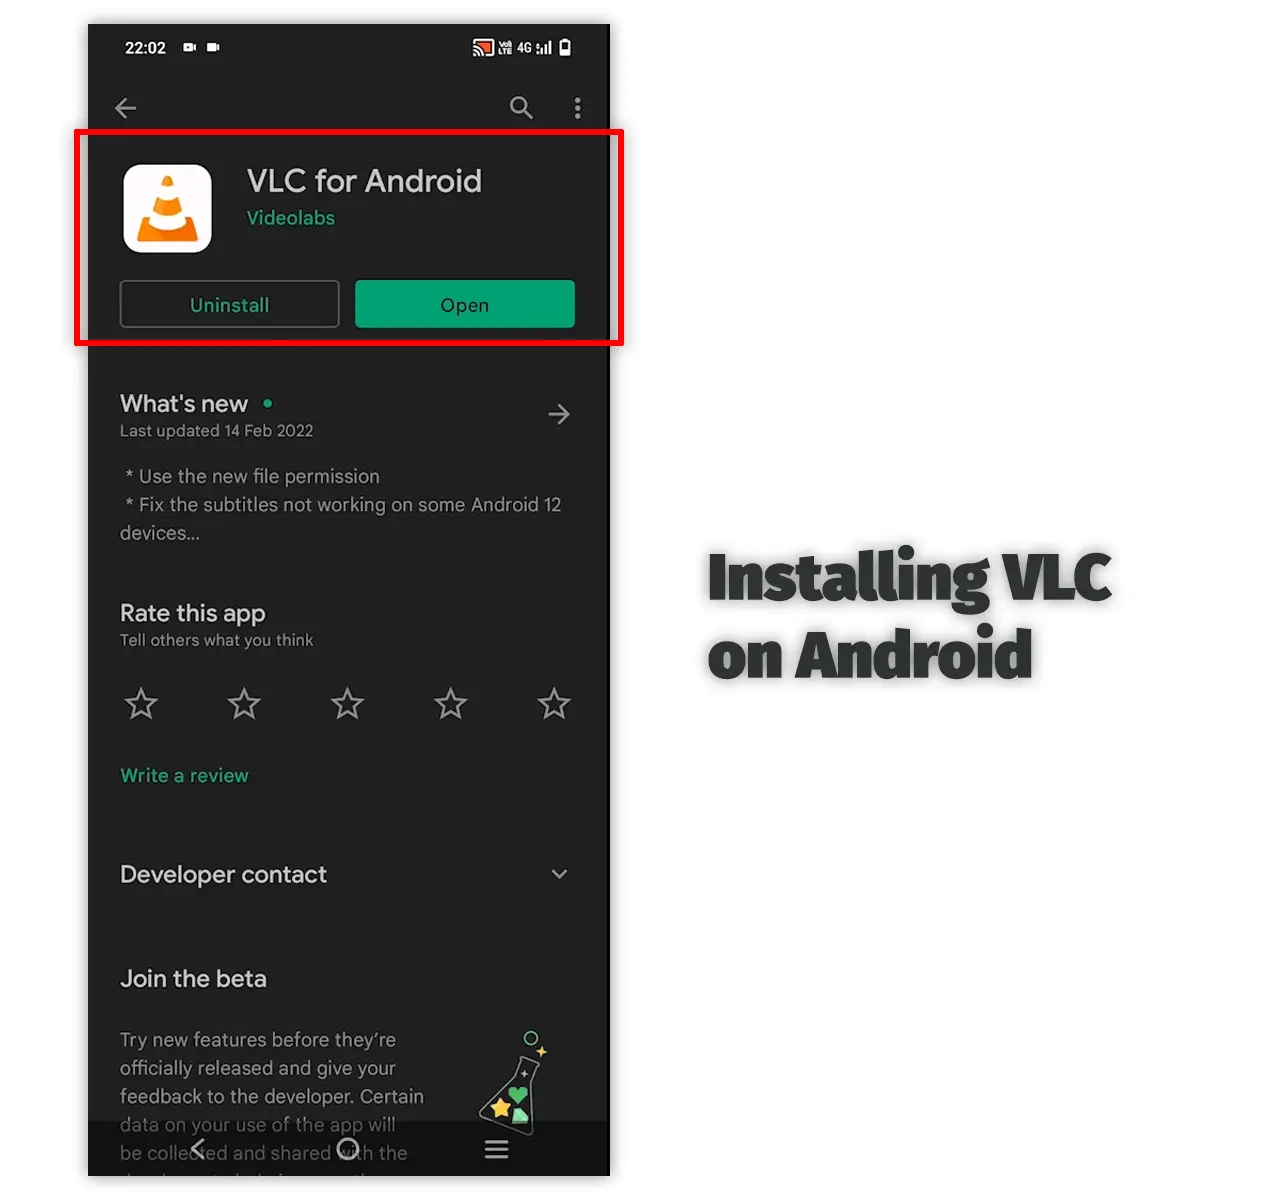 Installing VLC on Android